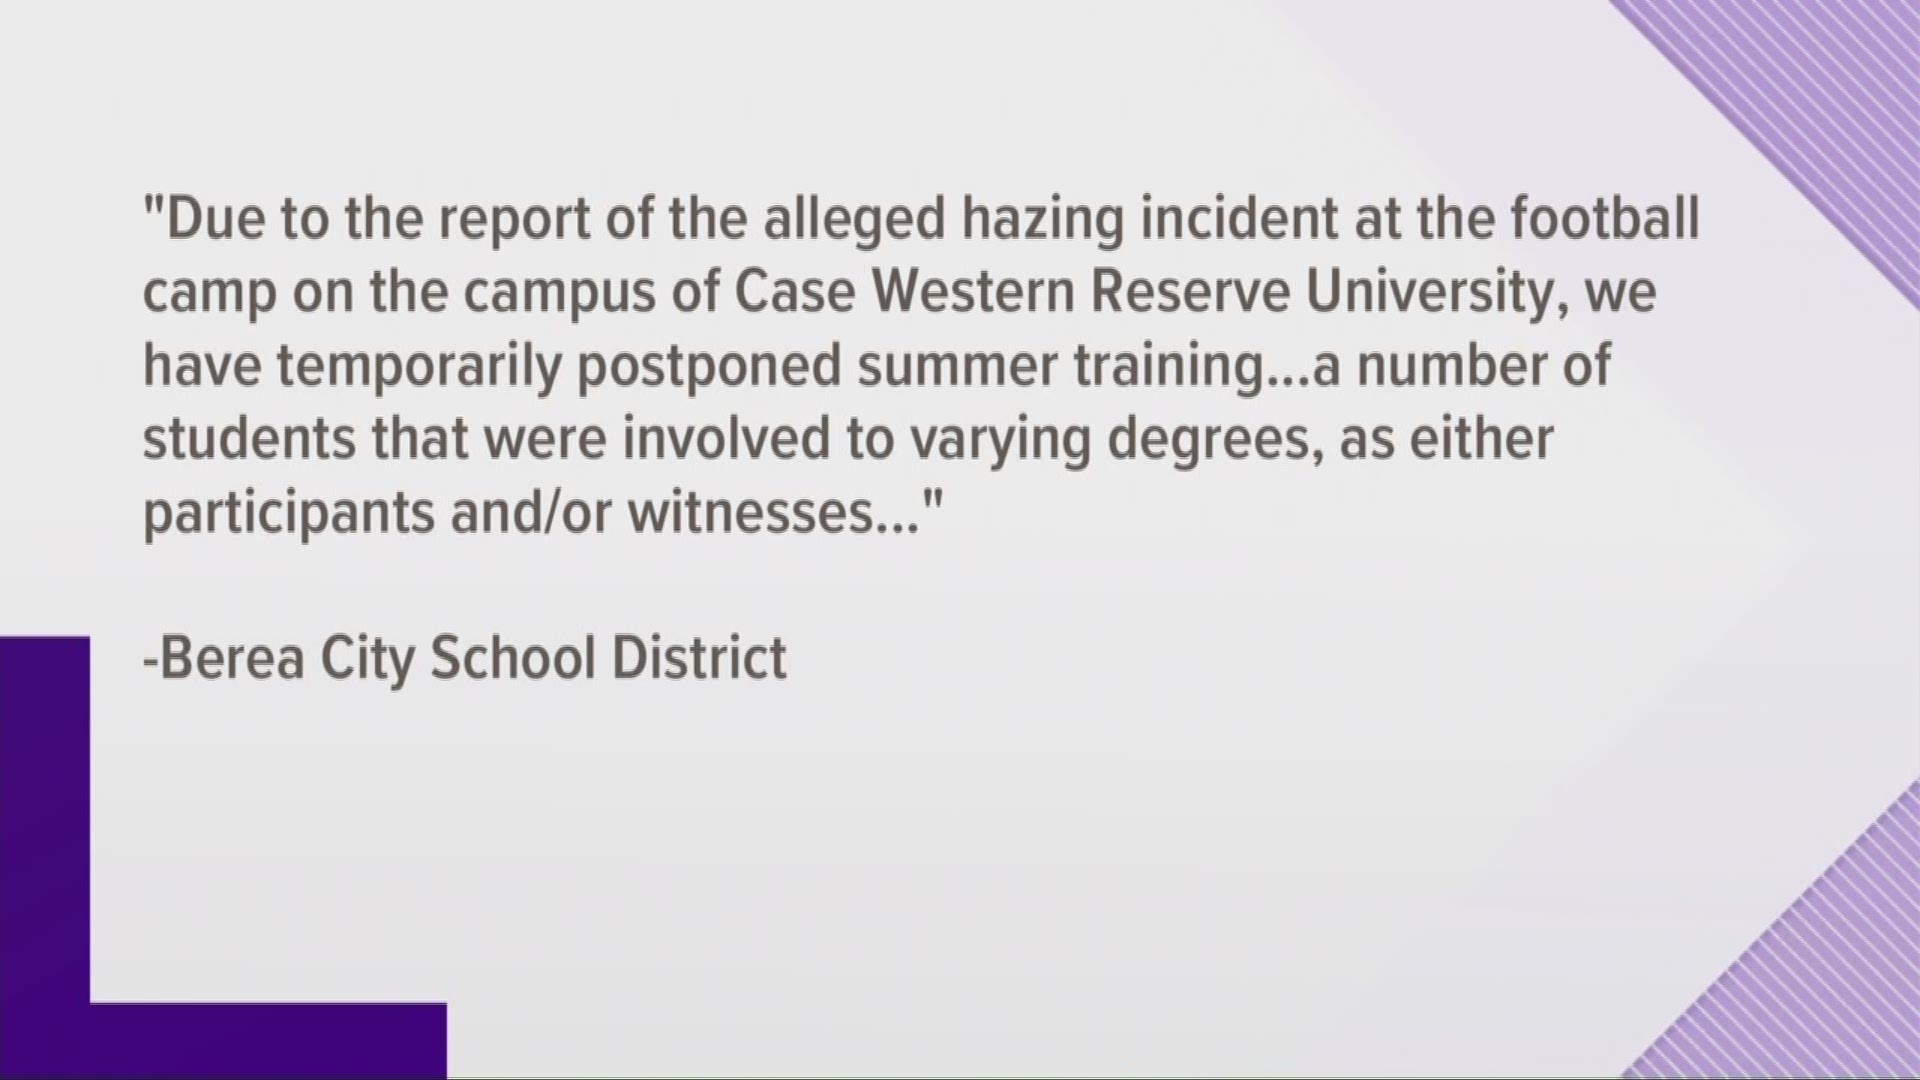 The district said in a statement Thursday that a number of students were involved in the incident in varying degrees, both as participants and witnesses.